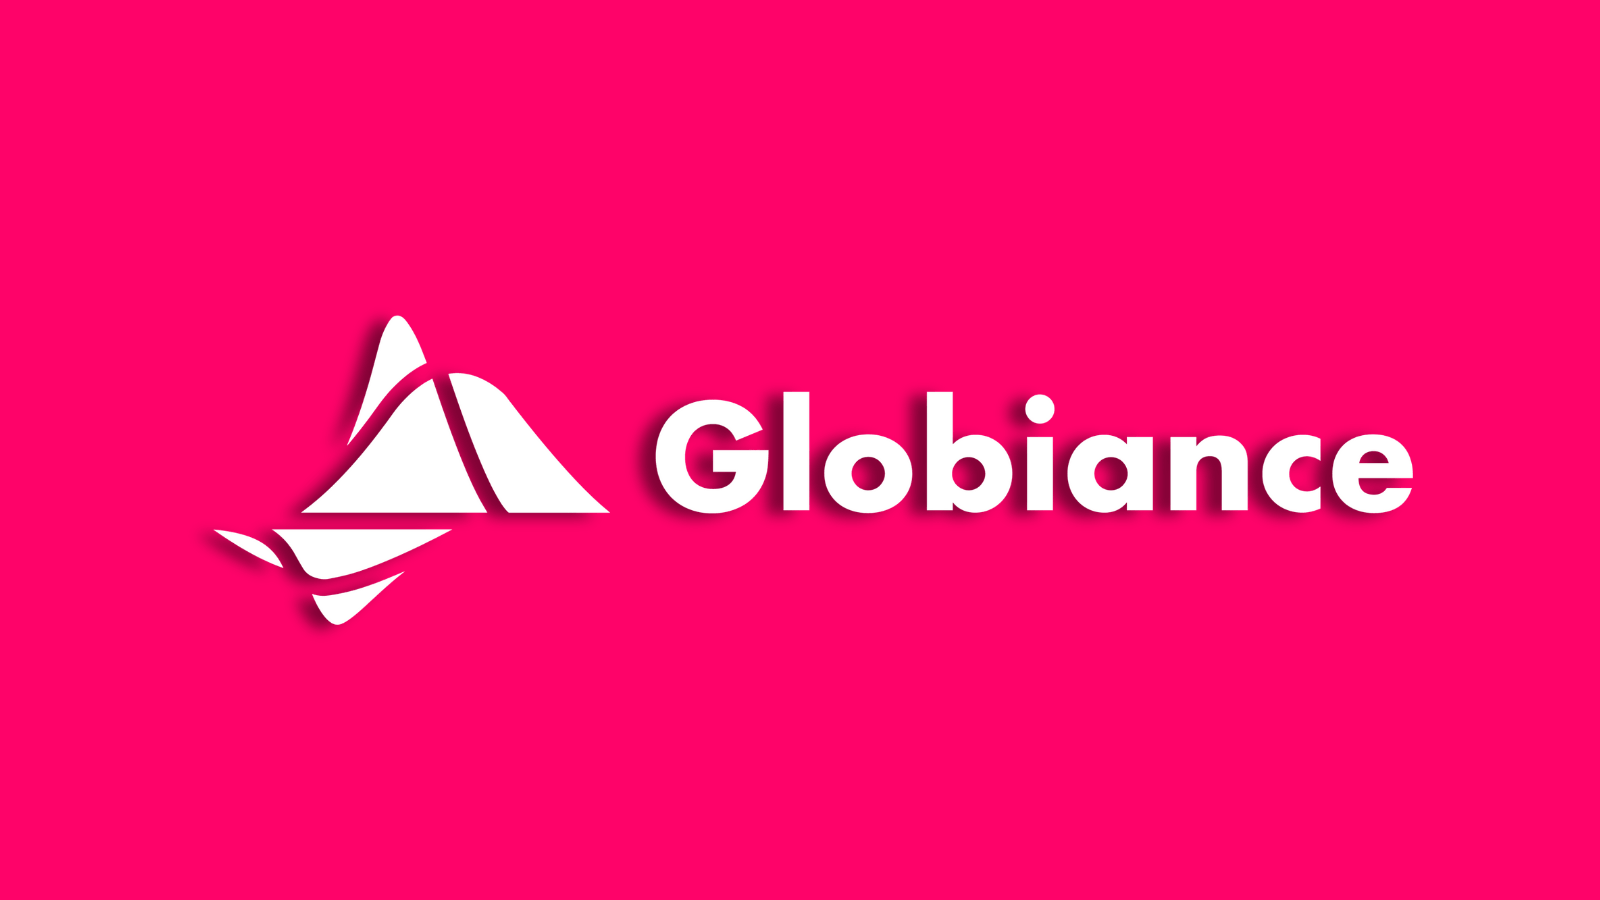 Globiance: Expanding the Horizon of Global Banking and Financial Services